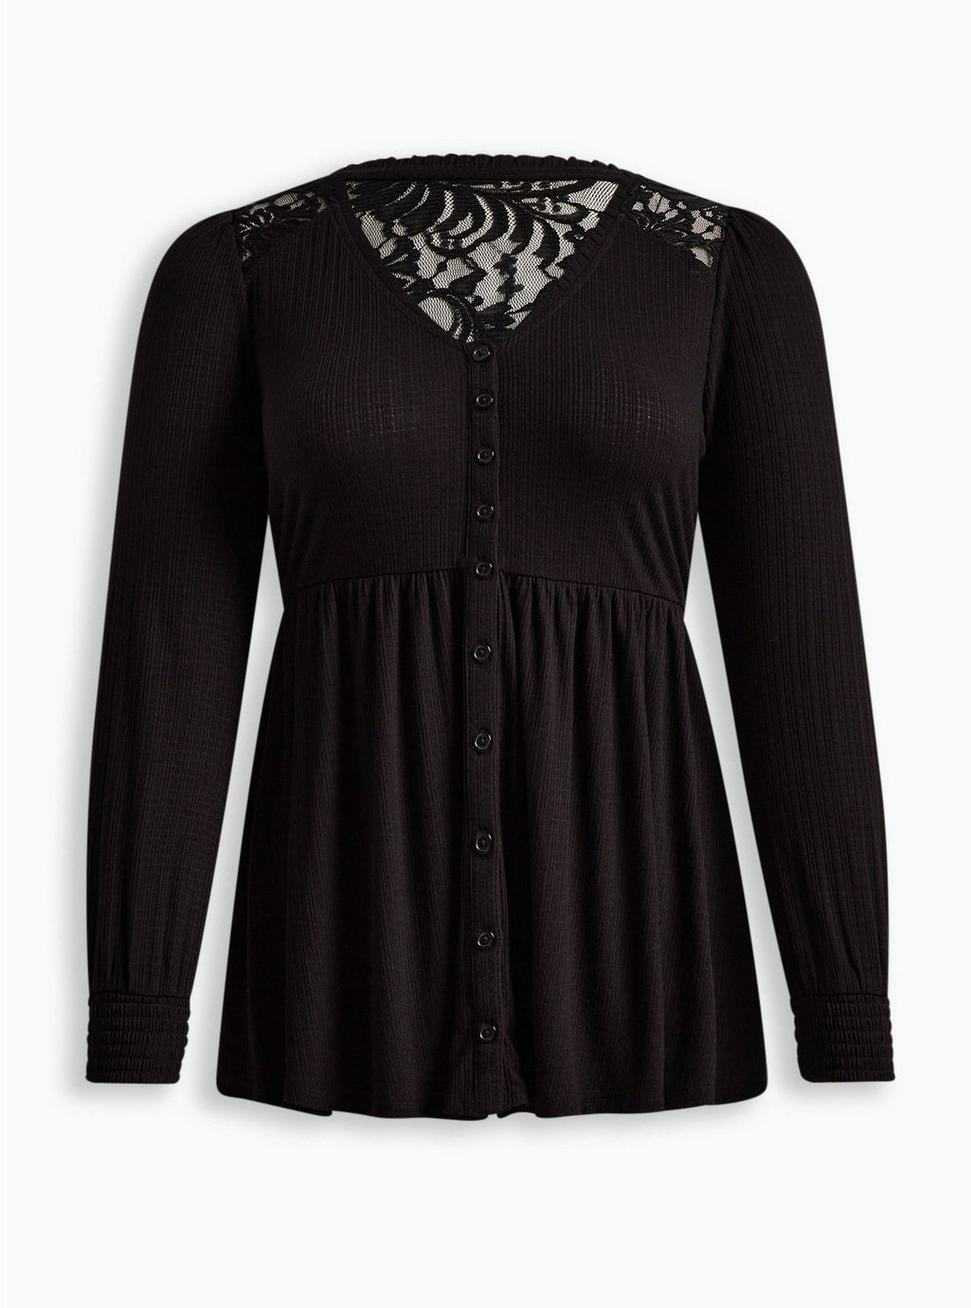 Plus Size Babydoll Knit V-Neck Button-Front Lace Inset Peasant Sleeve Top, BLACK, hi-res